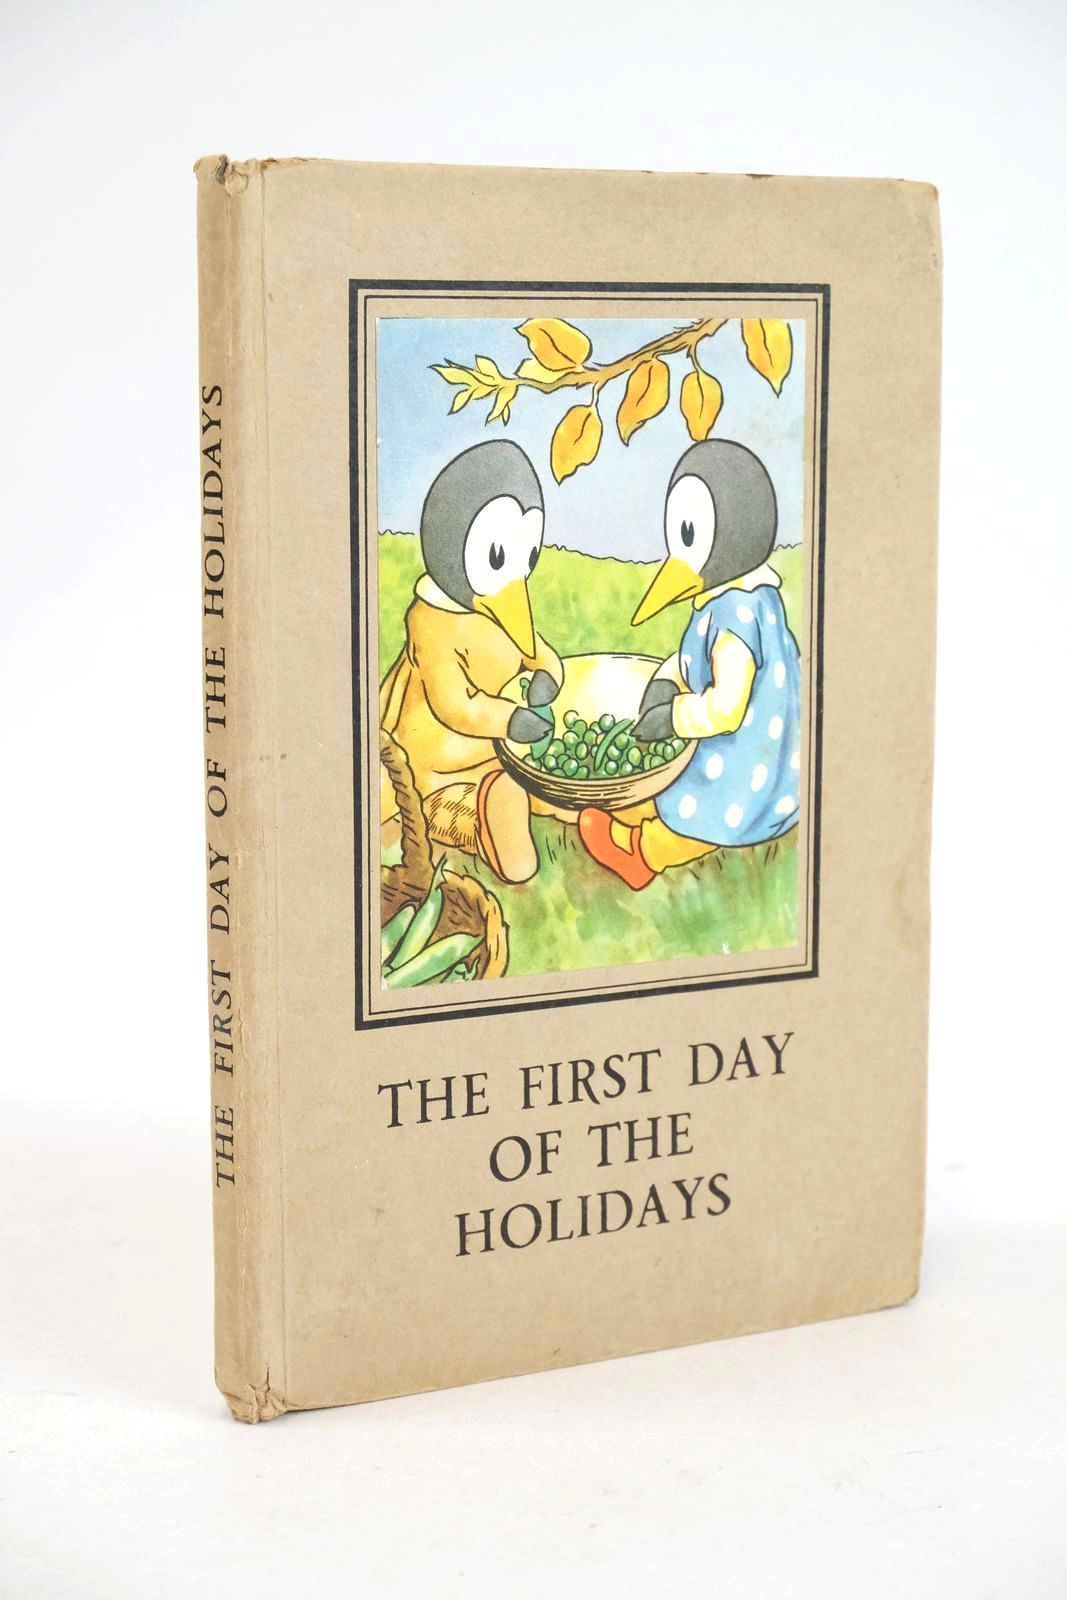 Photo of THE FIRST DAY OF THE HOLIDAYS written by Macgregor, A.J.
Perring, W. illustrated by Macgregor, A.J. published by Wills & Hepworth Ltd. (STOCK CODE: 1325480)  for sale by Stella & Rose's Books